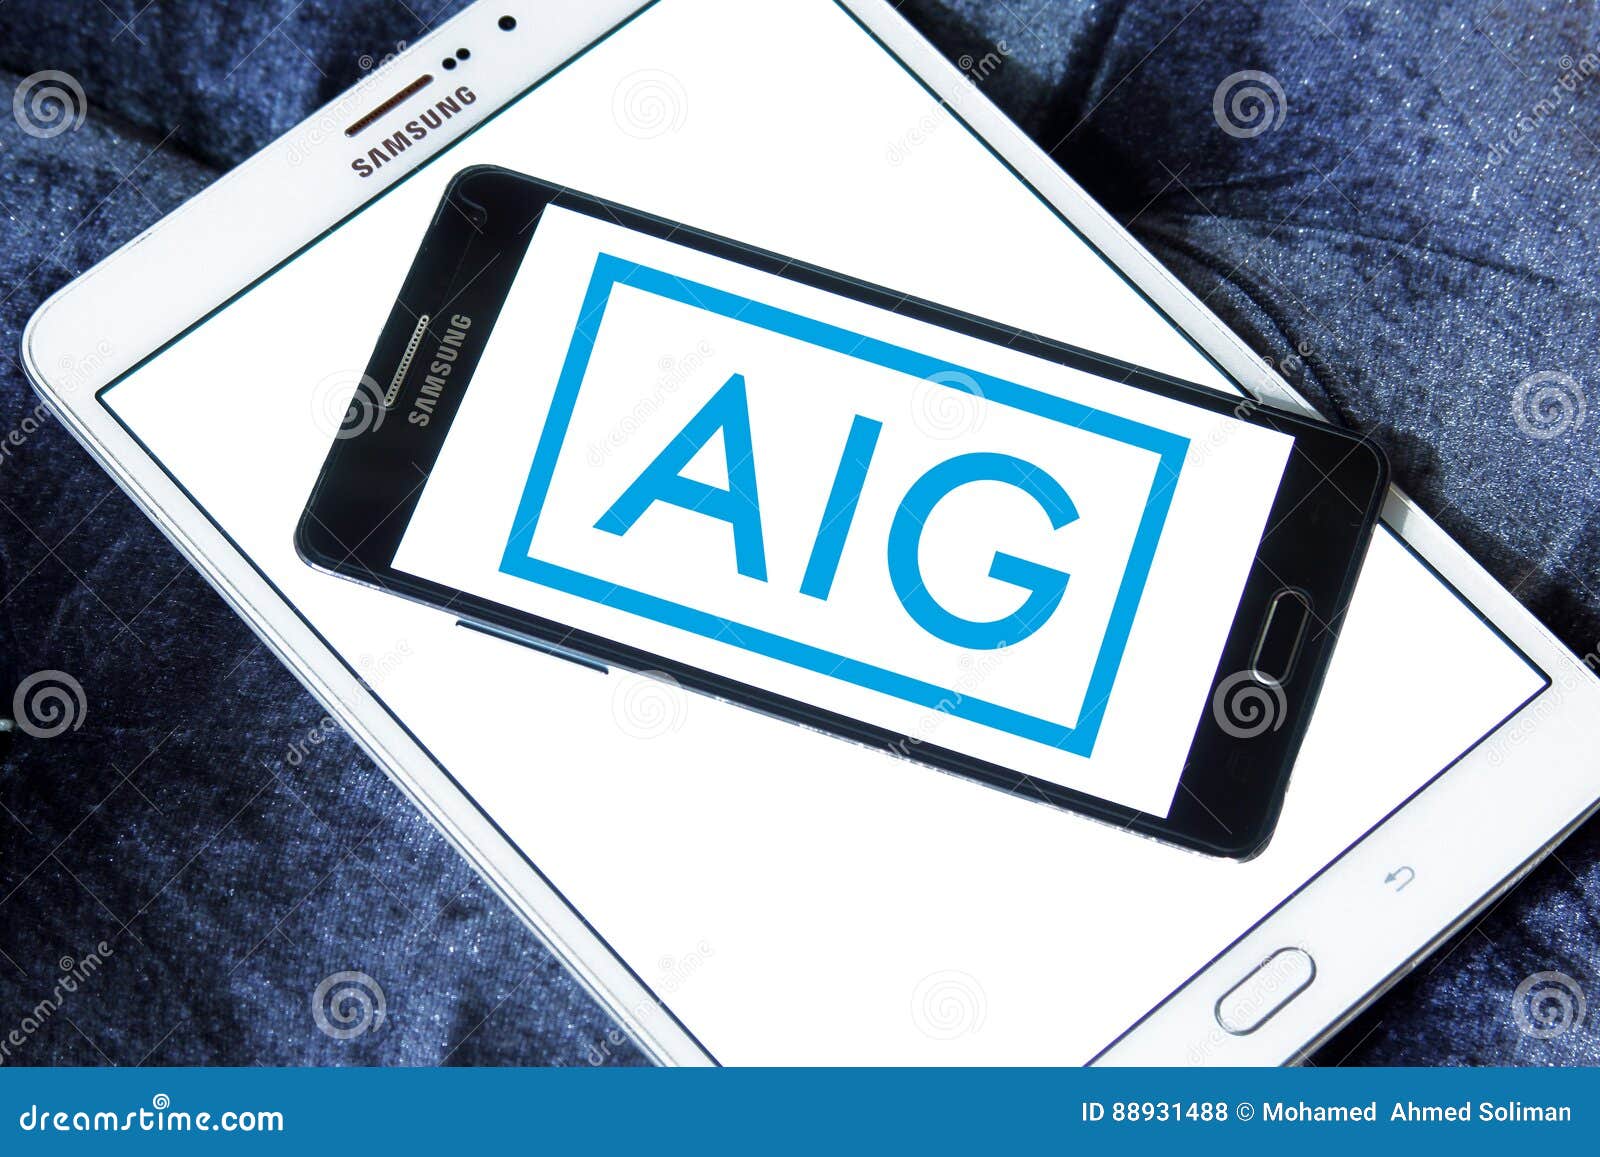 Aig insurance logo editorial stock photo. Image of collection - 88931488